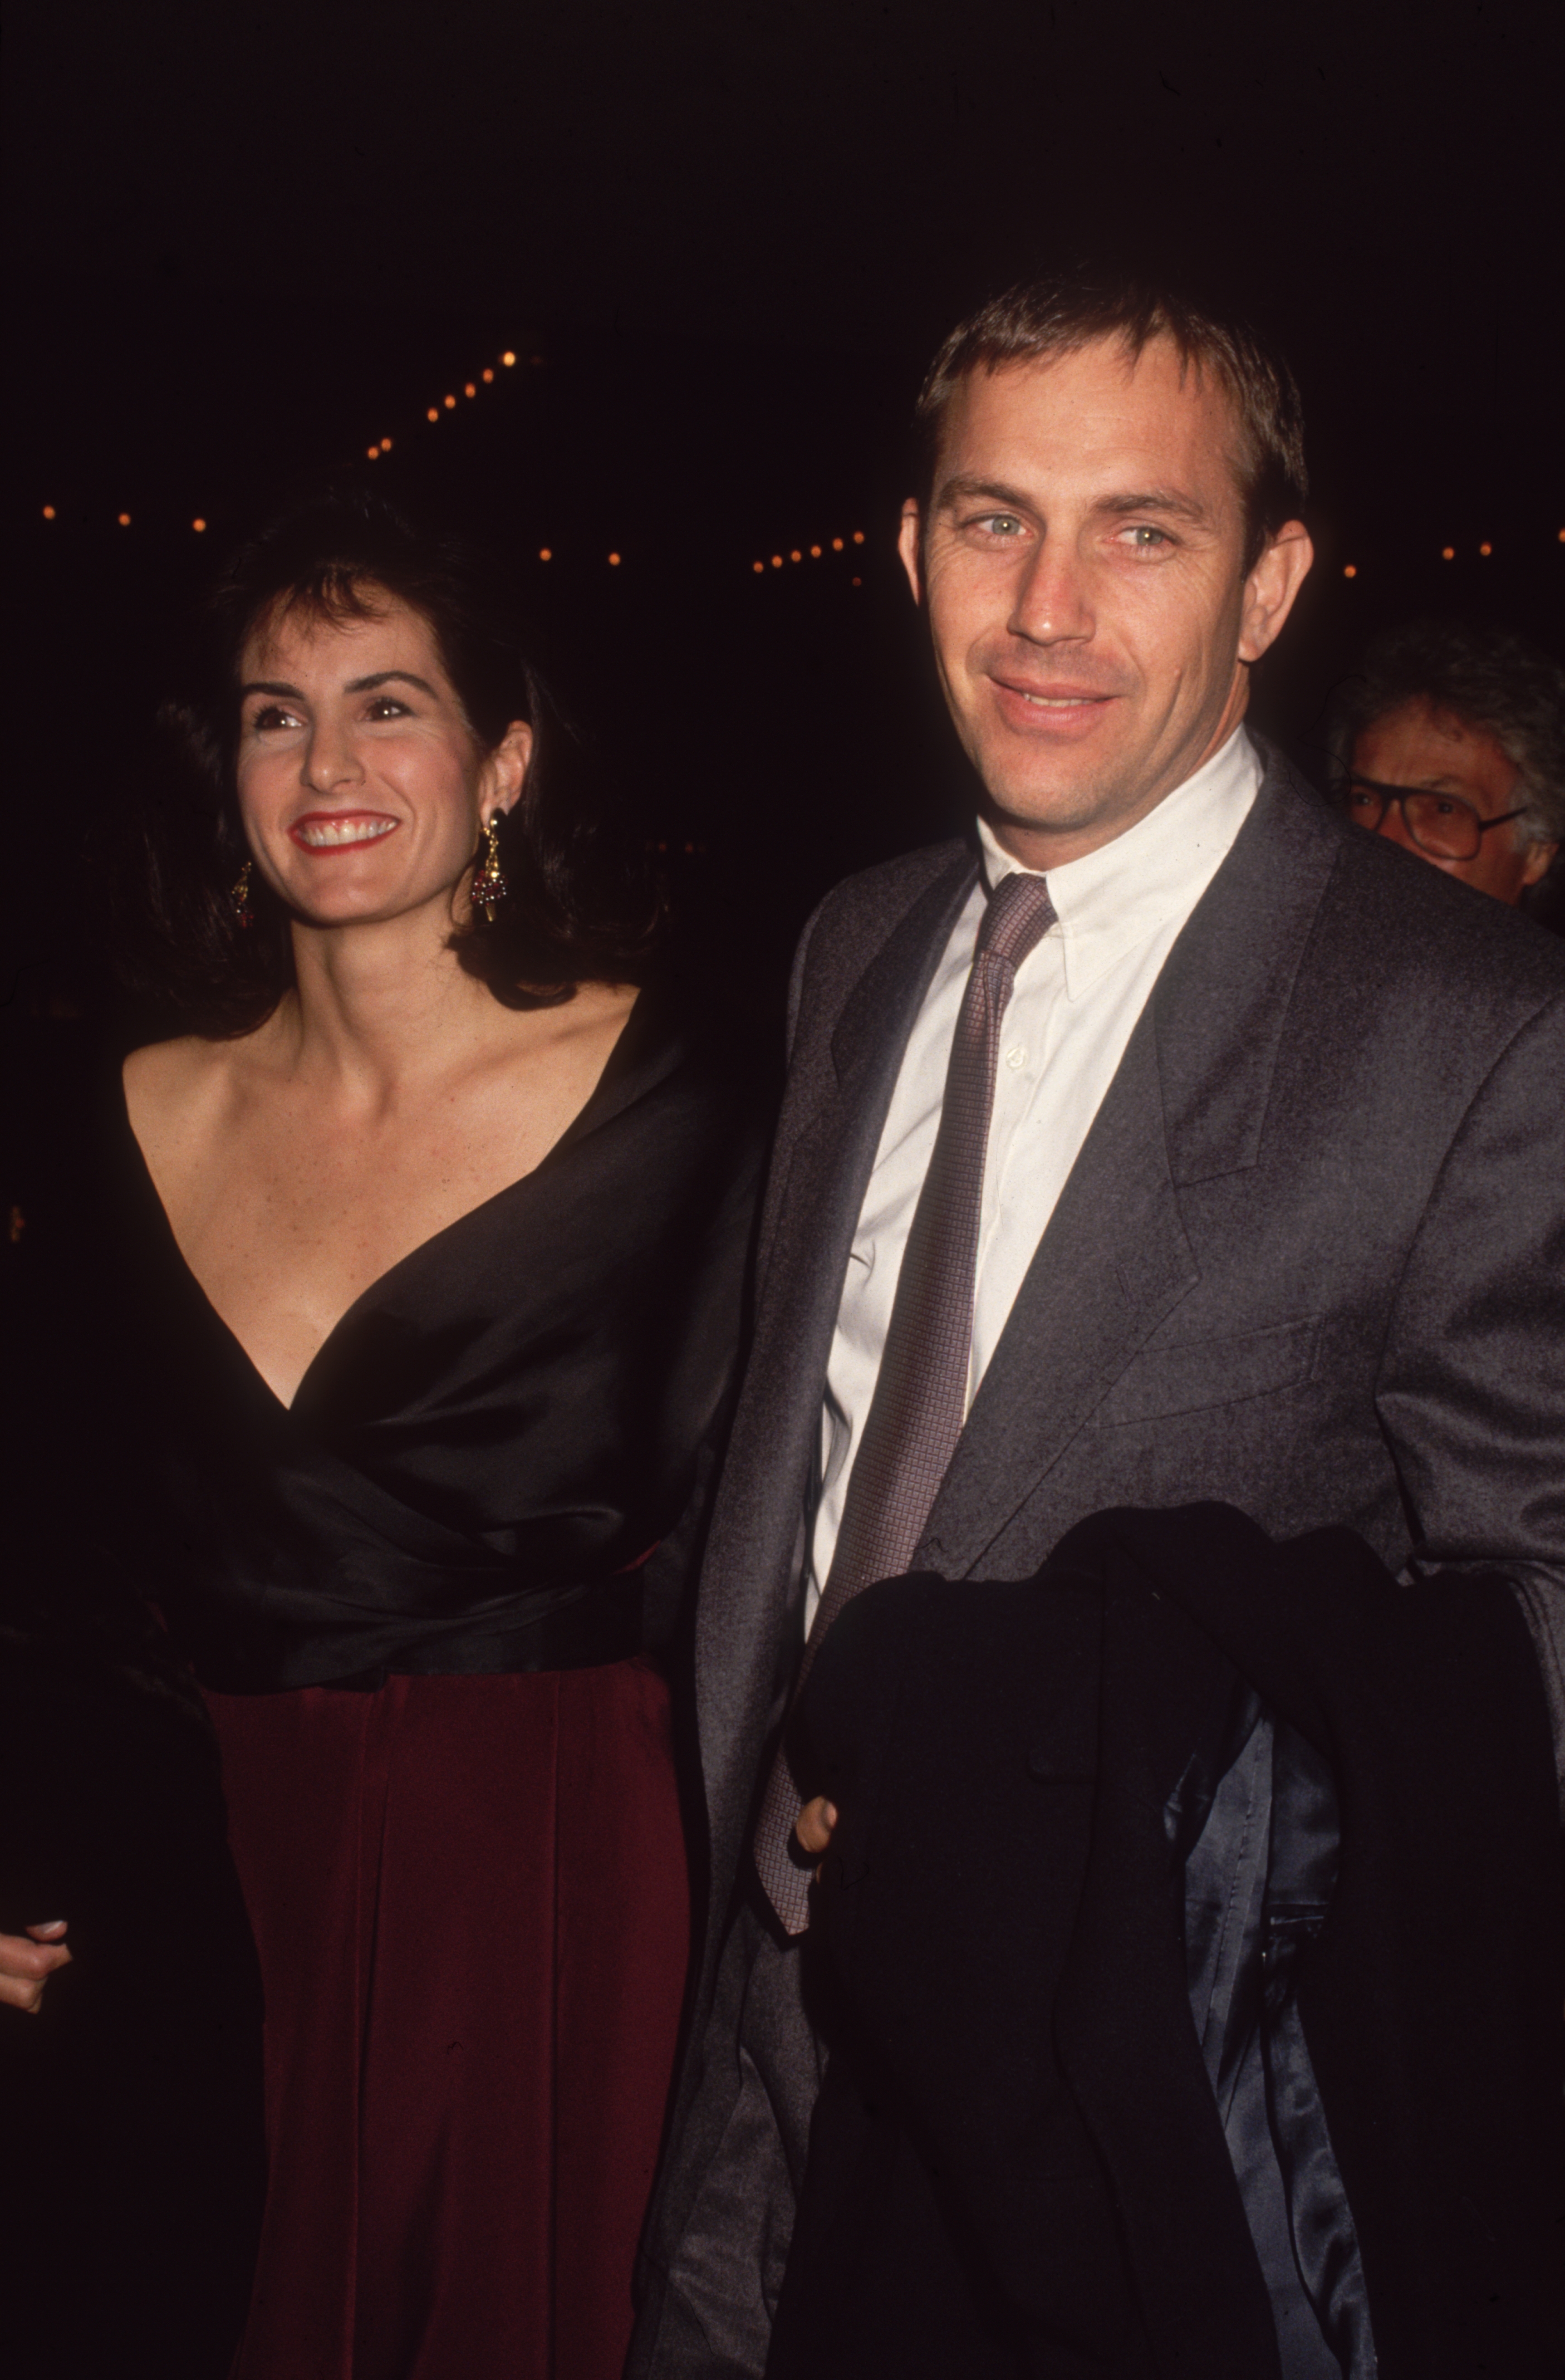 Kevin Costner and Cindy Silva, circa 1992 | Source: Getty Images